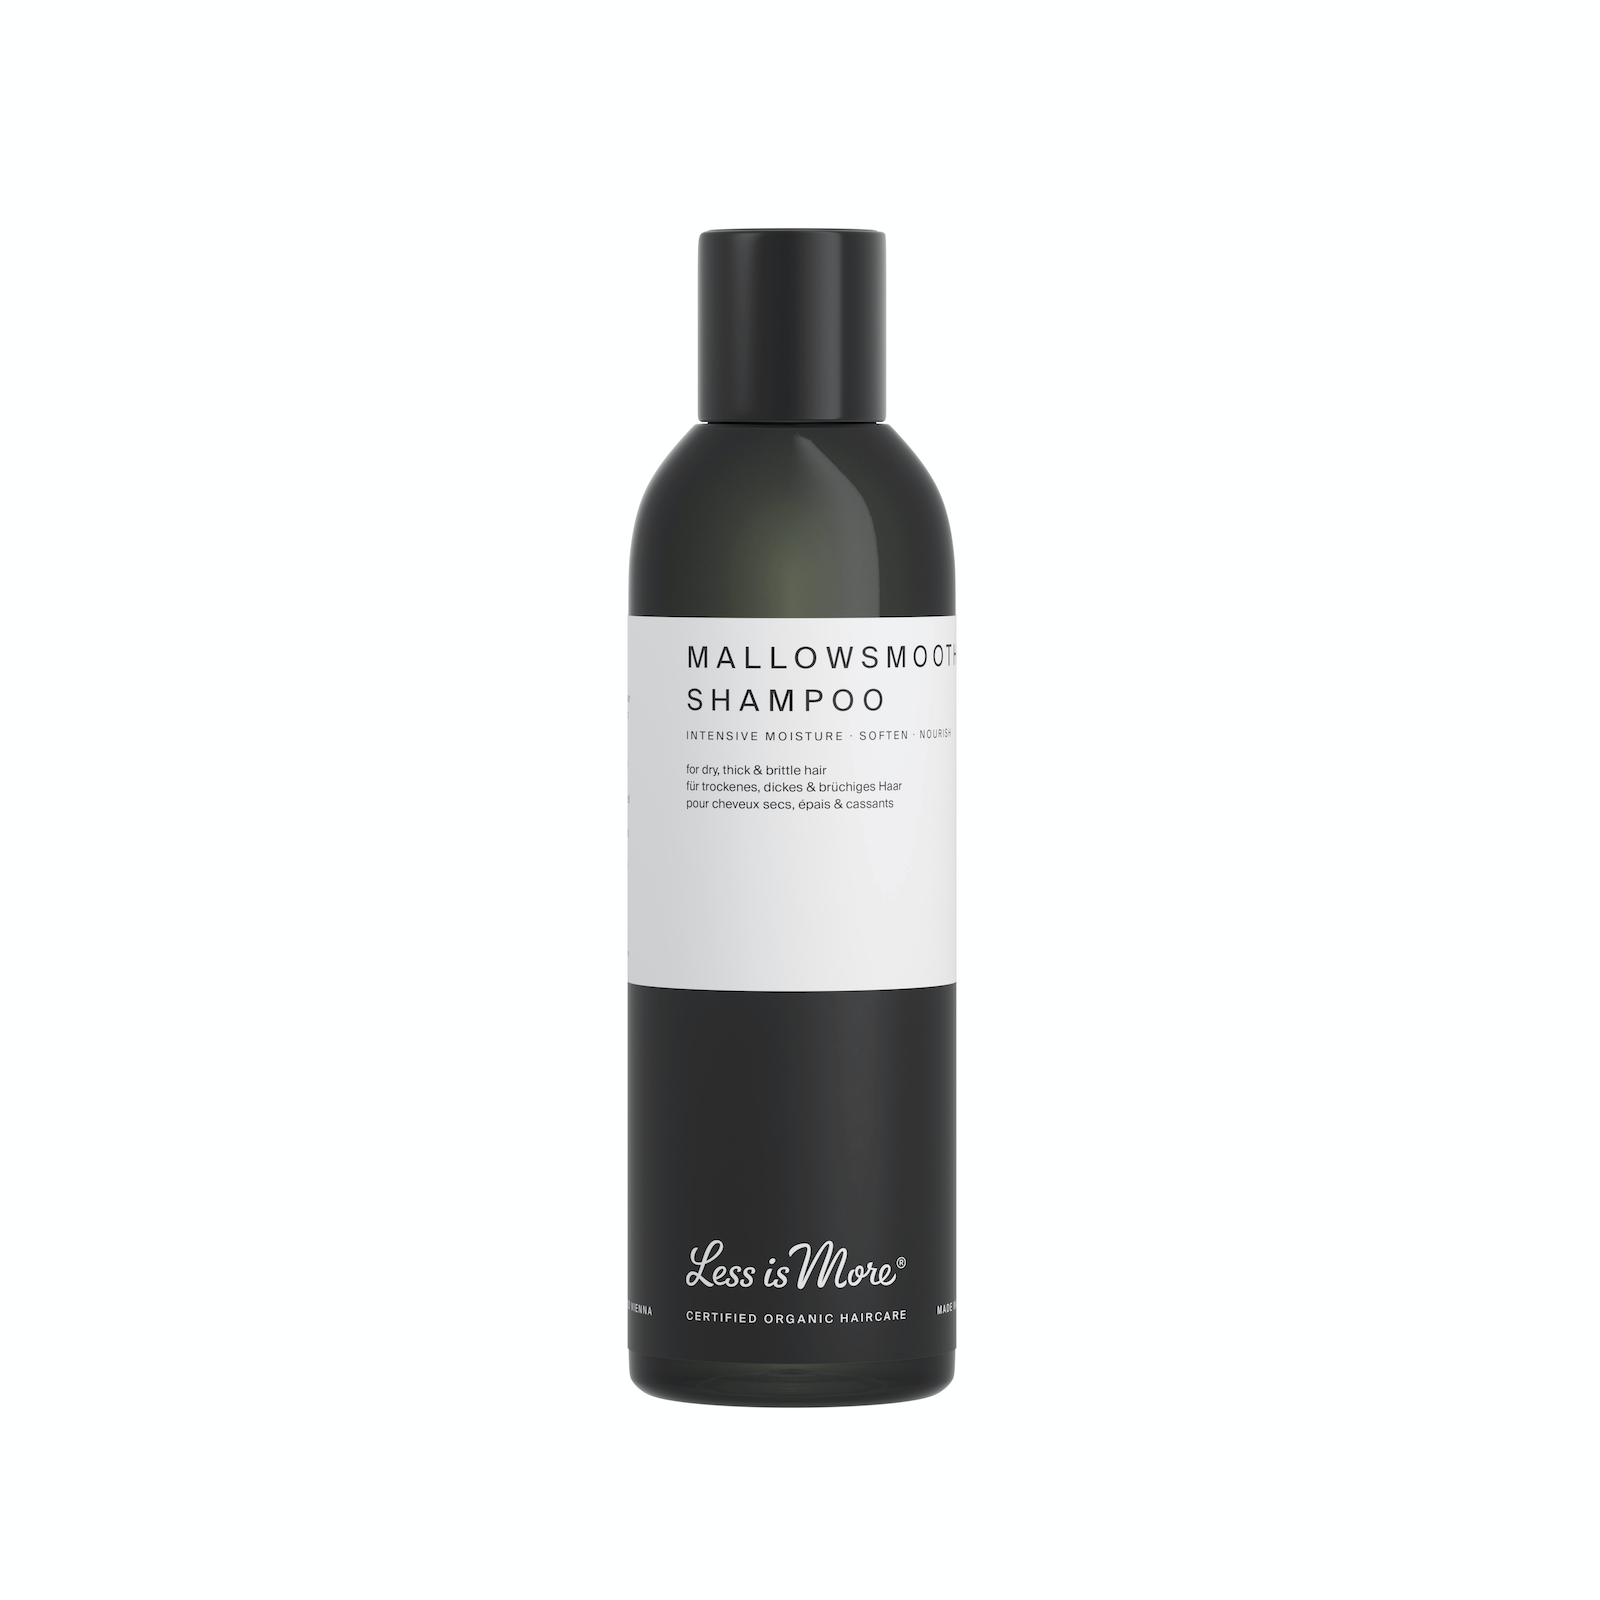 Mallowsmooth Shampoo 200 ml from Less Is More